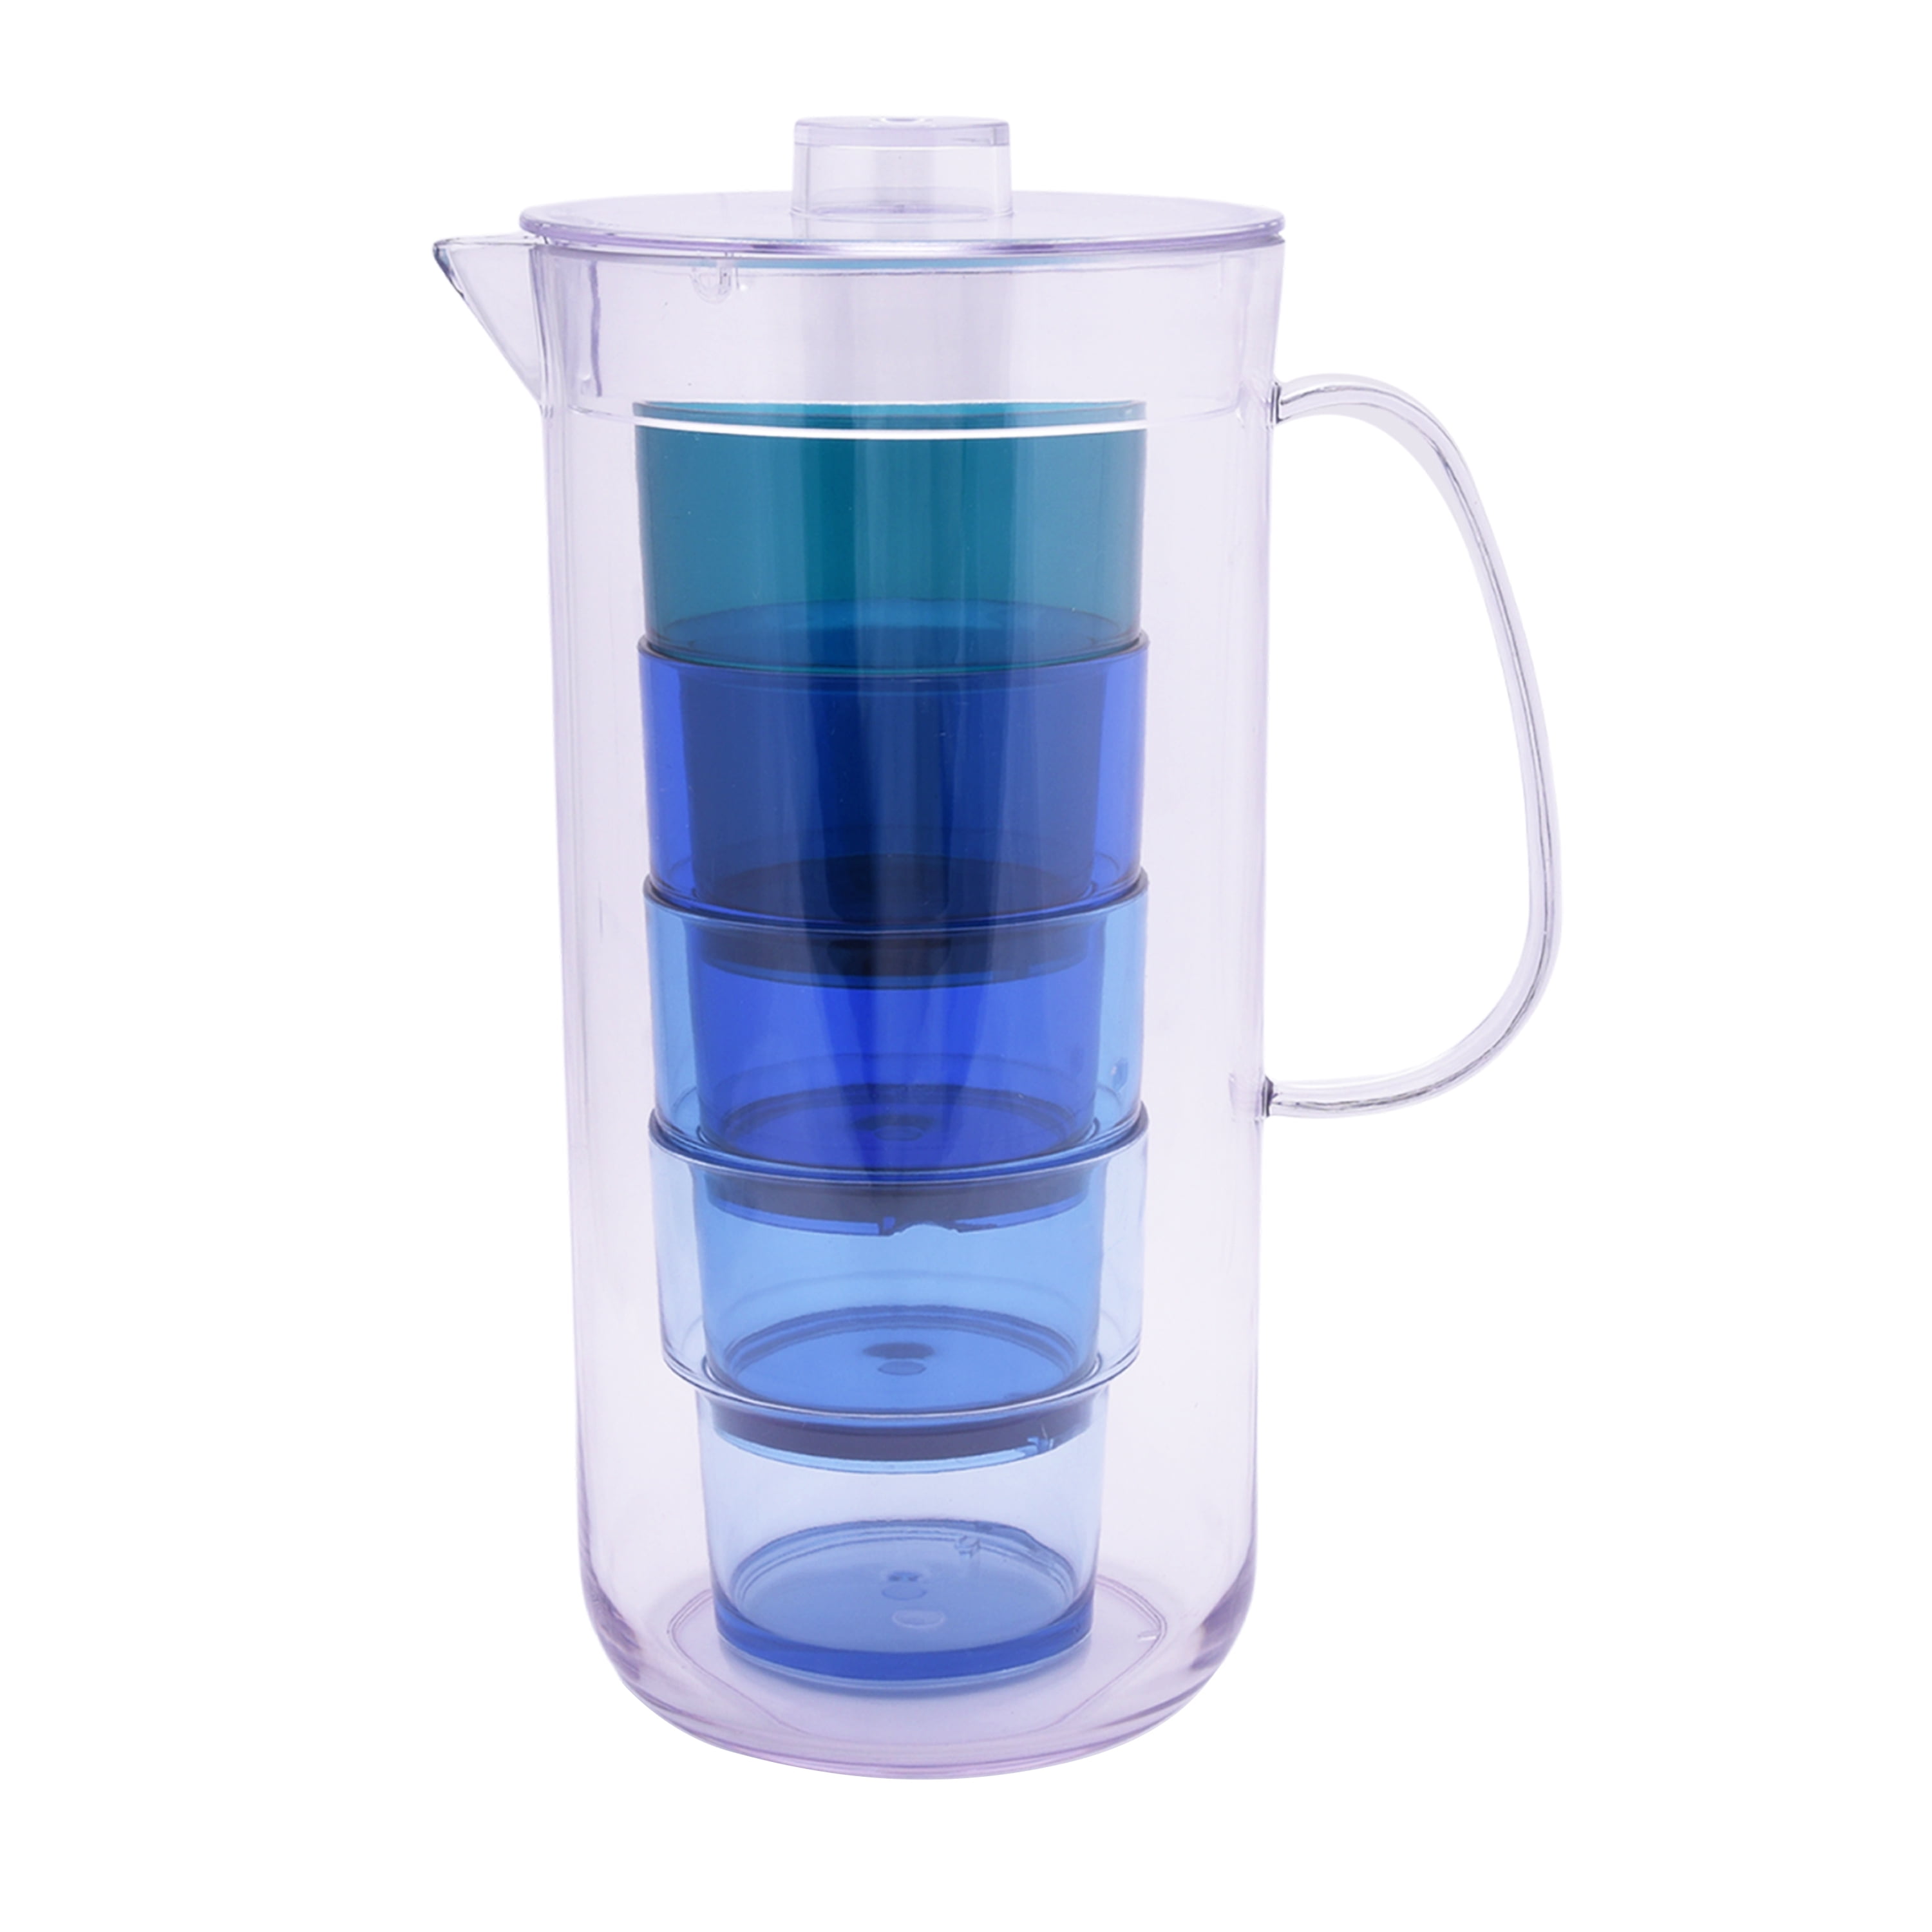 Details about   Sterilite 0488 One-Gallon Round Pitcher Clear Base with Blue-Atoll Teal Lid and 